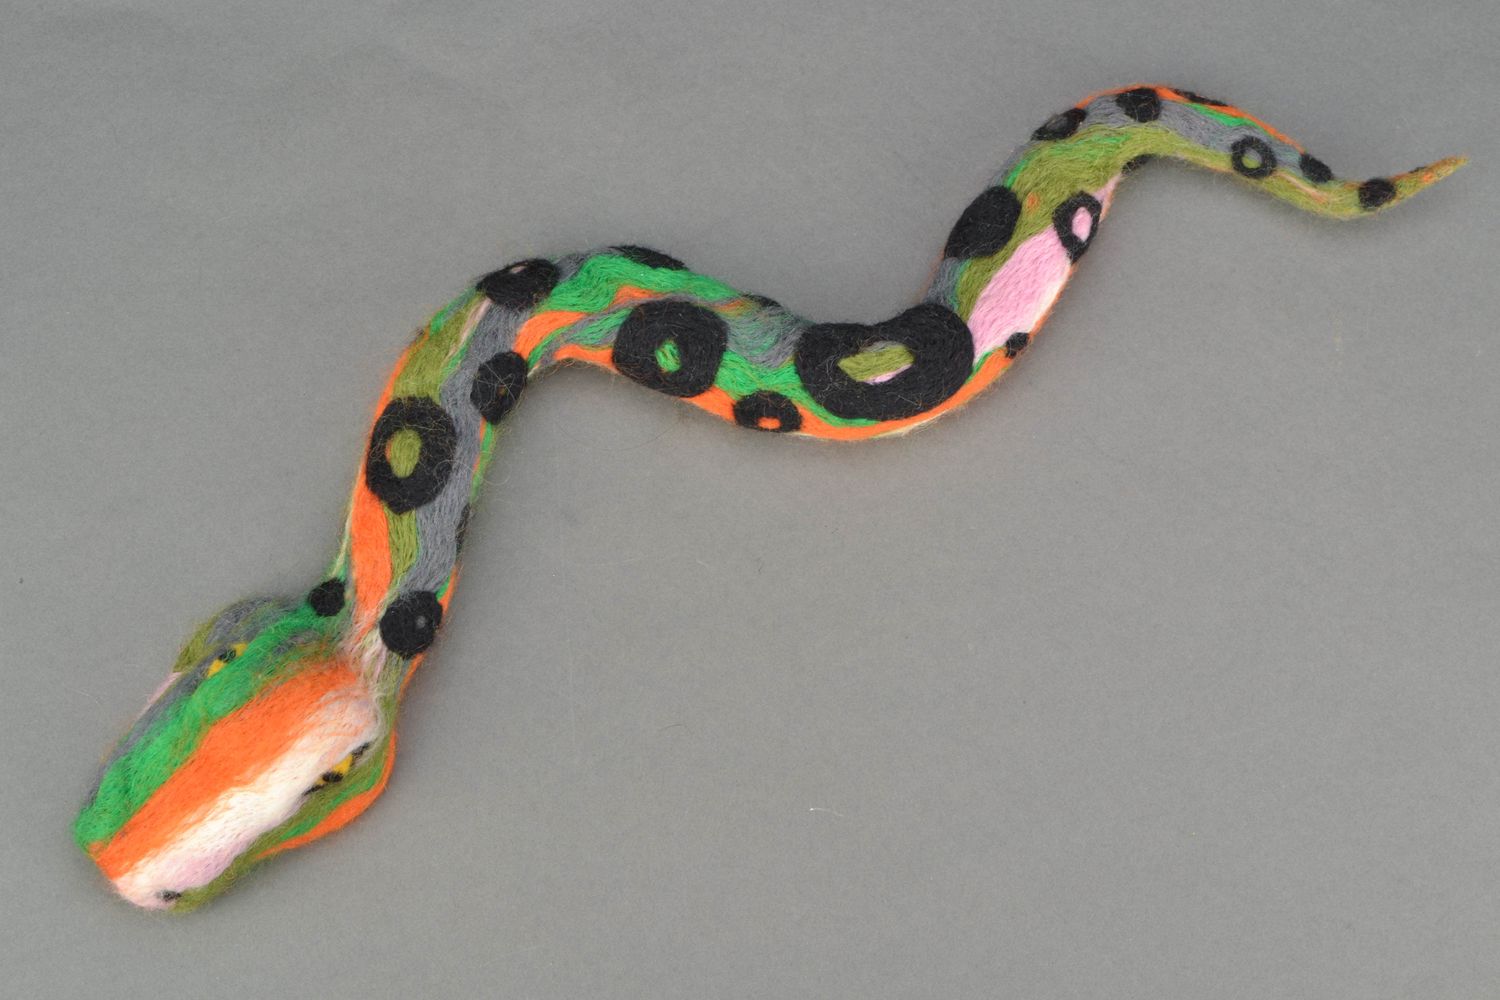 Wool felted toy snake photo 5